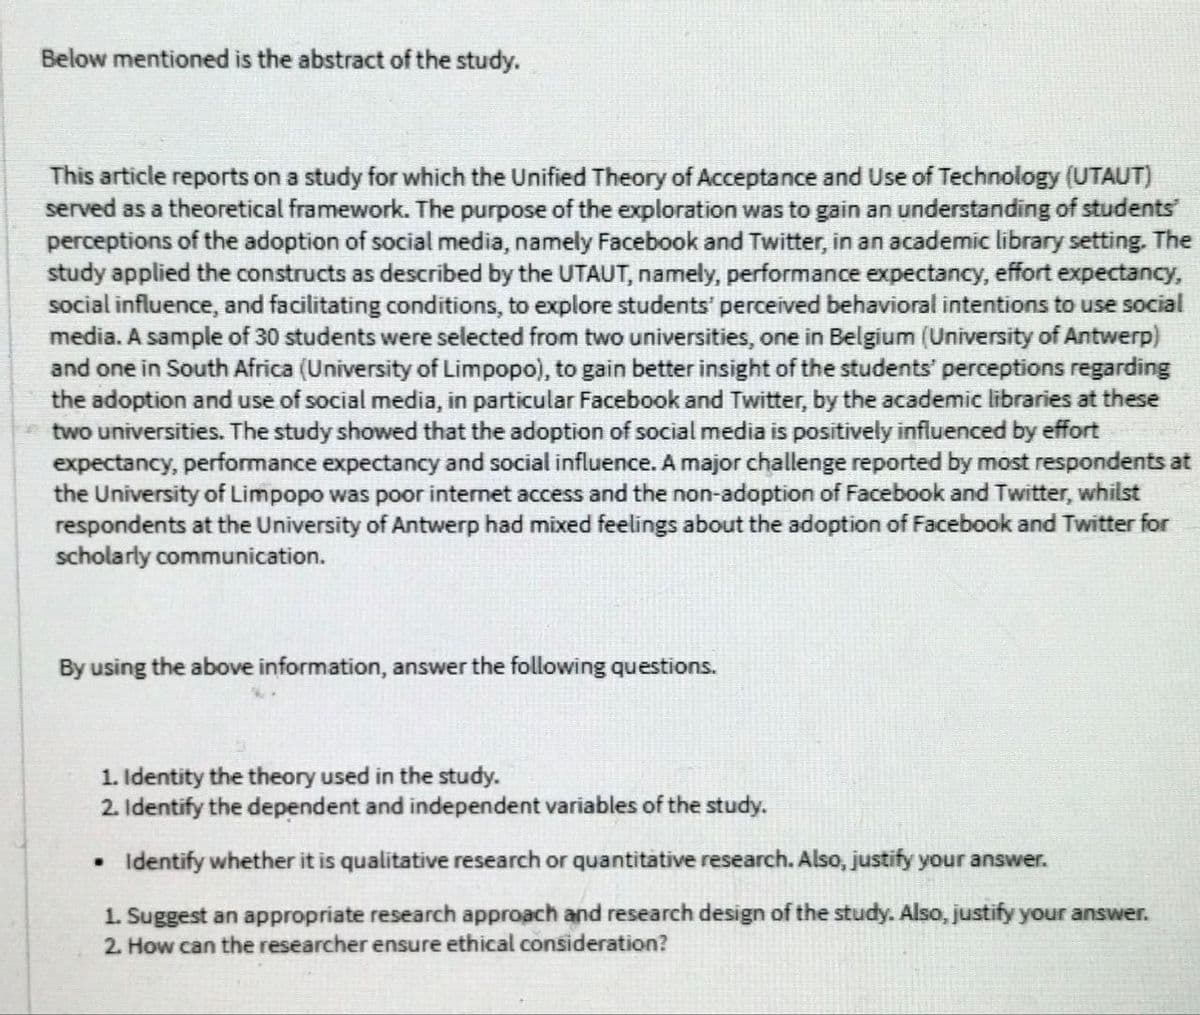 Below mentioned is the abstract of the study.
This article reports on a study for which the Unified Theory of Acceptance and Use of Technology (UTAUT)
served as a theoretical framework. The purpose of the exploration was to gain an understanding of students
perceptions of the adoption of social media, namely Facebook and Twitter, in an academic library setting. The
study applied the constructs as described by the UTAUT, namely, performance expectancy, effort expectancy,
social influence, and facilitating conditions, to explore students' perceived behavioral intentions to use social
media. A sample of 30 students were selected from two universities, one in Belgium (University of Antwerp)
and one in South Africa (University of Limpopo), to gain better insight of the students' perceptions regarding
the adoption and use of social media, in particular Facebook and Twitter, by the academic libraries at these
two universities. The study showed that the adoption of social media is positively influenced by effort
expectancy, performance expectancy and social influence. A major challenge reported by most respondents at
the University of Limpopo was poor internet access and the non-adoption of Facebook and Twitter, whilst
respondents at the University of Antwerp had mixed feelings about the adoption of Facebook and Twitter for
scholarly communication.
By using the above information, answer the following questions.
1. Identity the theory used in the study.
2. Identify the dependent and independent variables of the study.
Identify whether it is qualitative research or quantitative research. Also, justify your answer.
1. Suggest an appropriate research approach and research design of the study. Also, justify your answer.
2. How can the researcher ensure ethical consideration?
